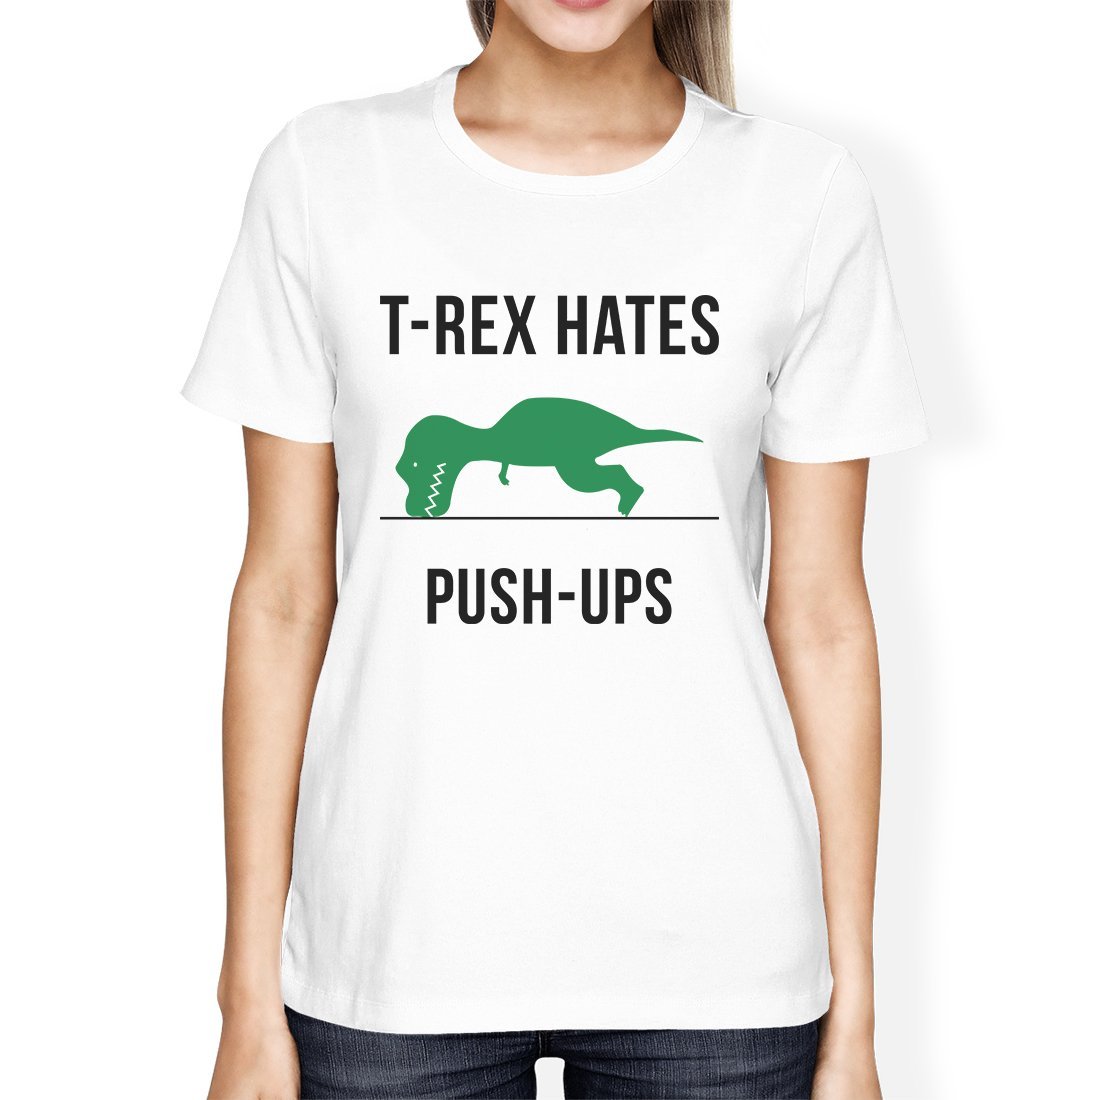 T-Rex Push Ups Womens Humorous Gym Tops Funny Graphic T-Shirt Gift-Gains Everyday